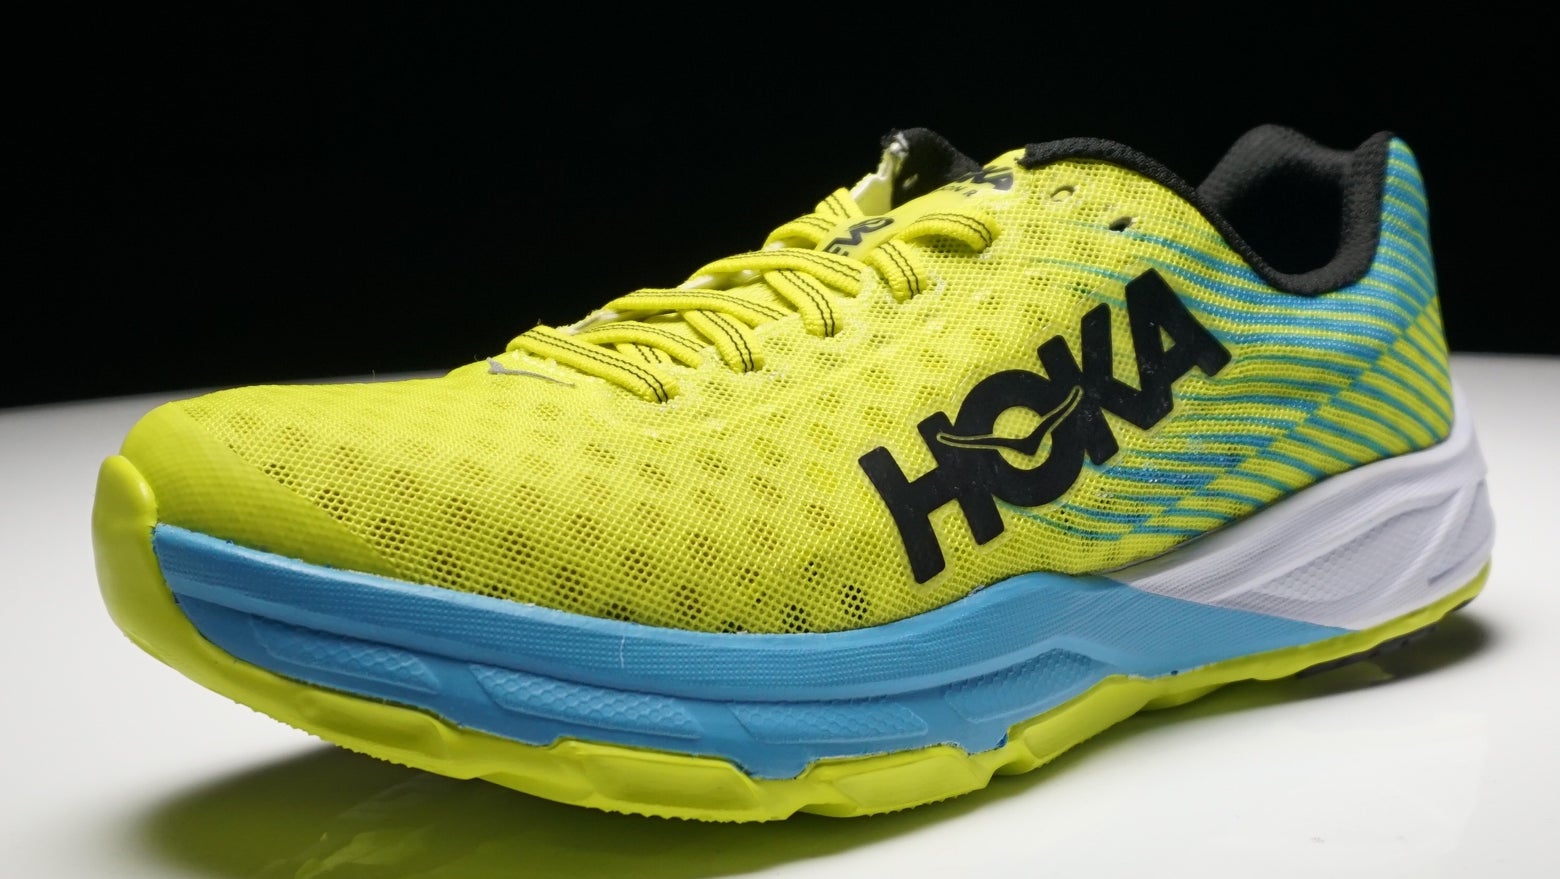 HOKA ONE ONE Evo Carbon Rocket | First Look Review